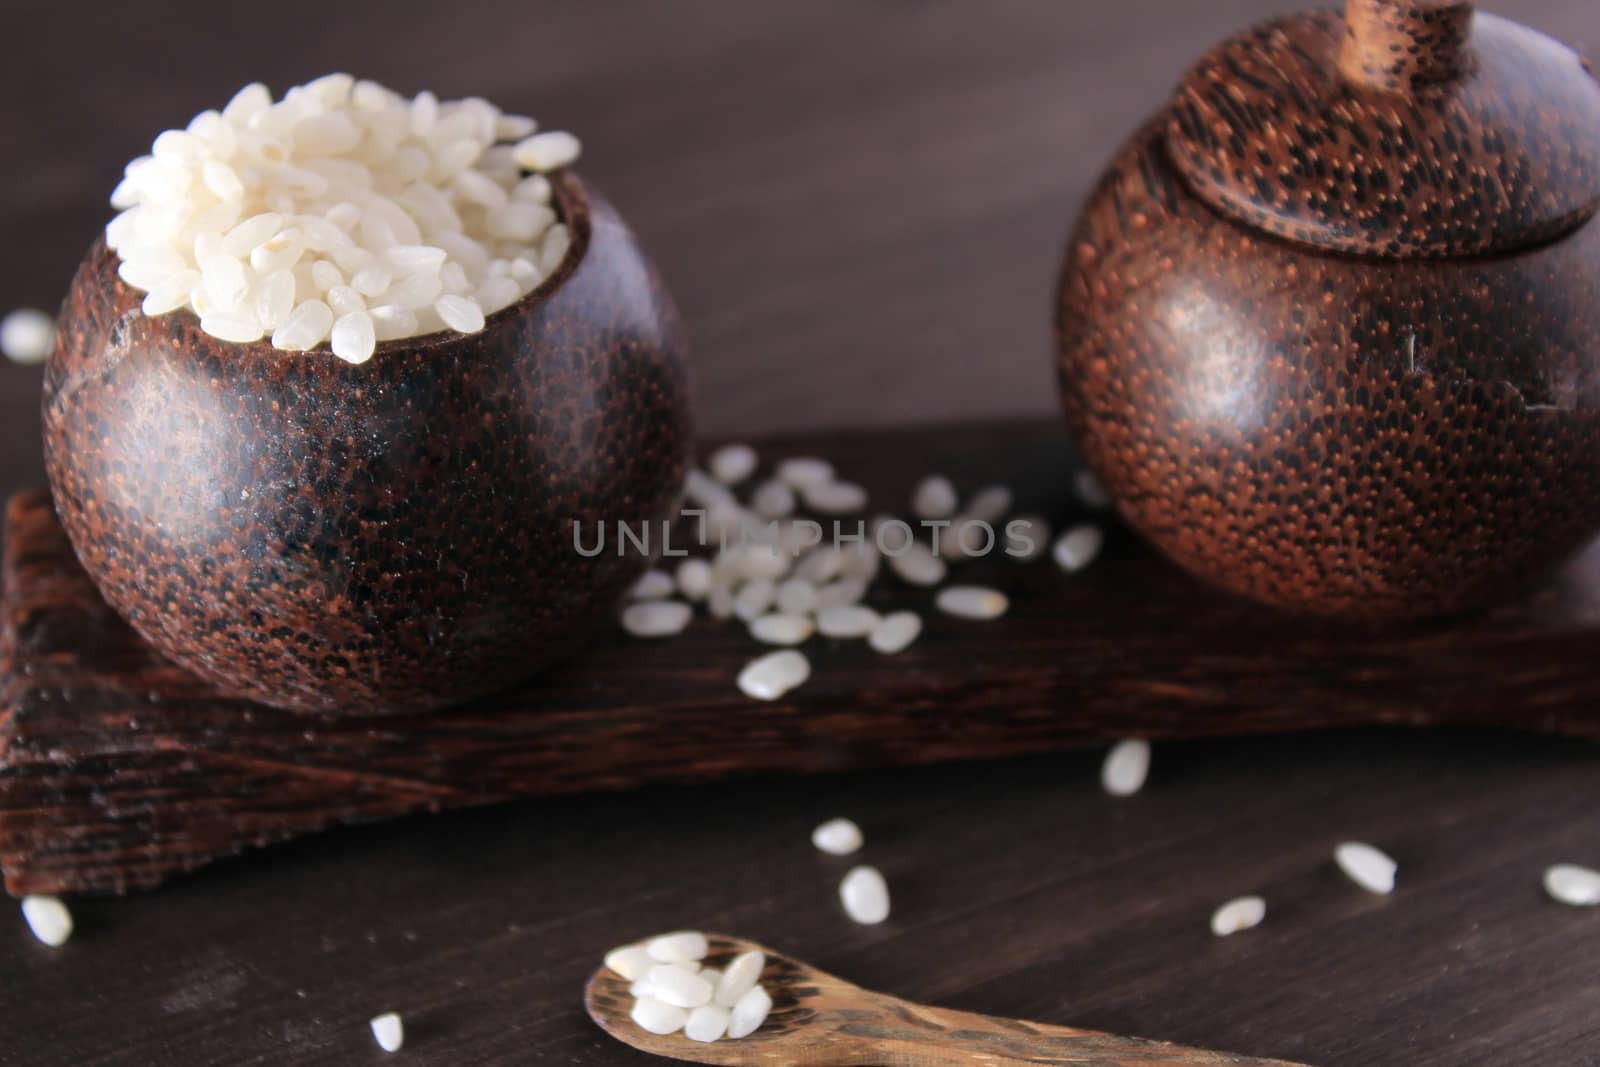 Small wooden bowls plenty with white rice. Little spoon on the table